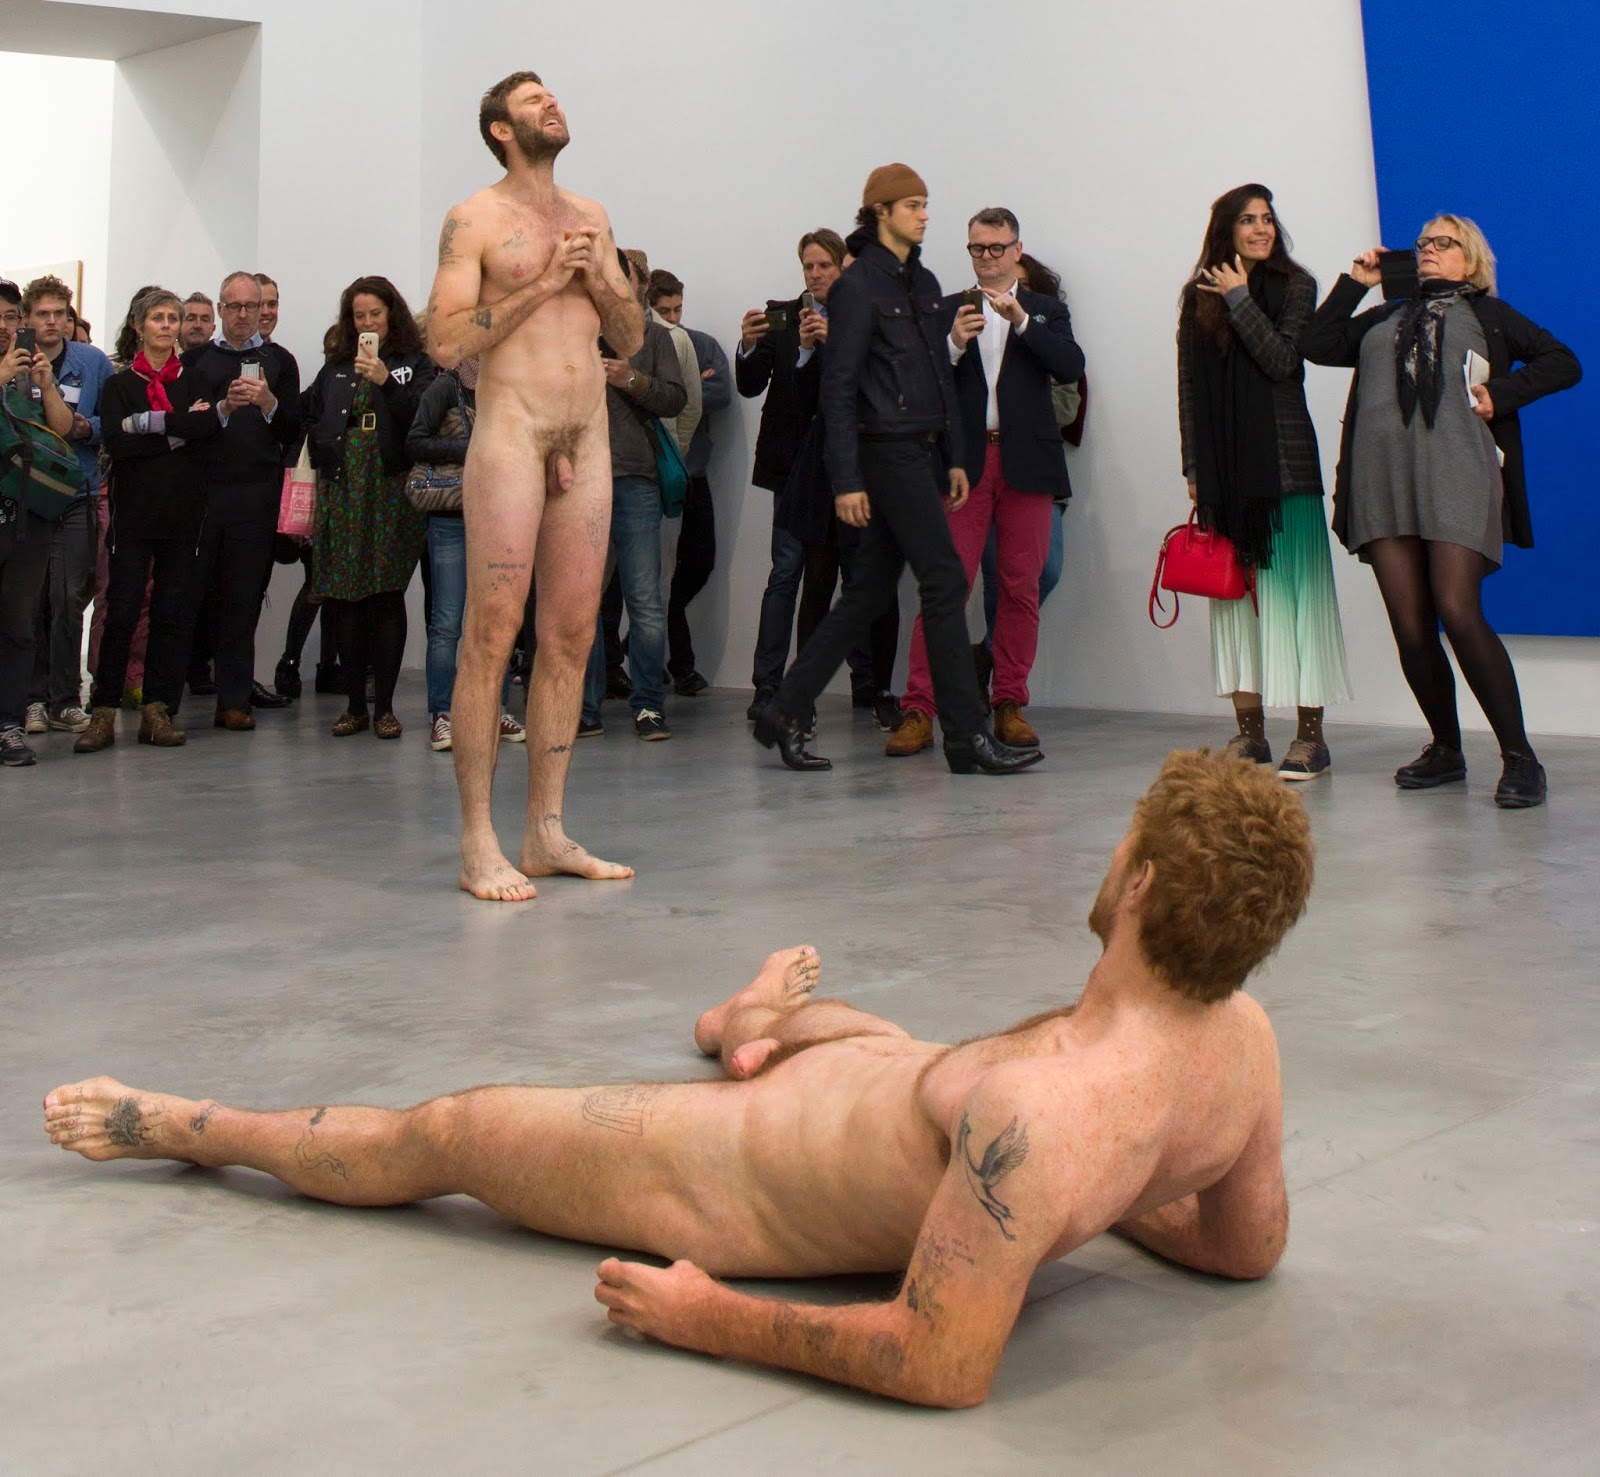 Nude men punished by women